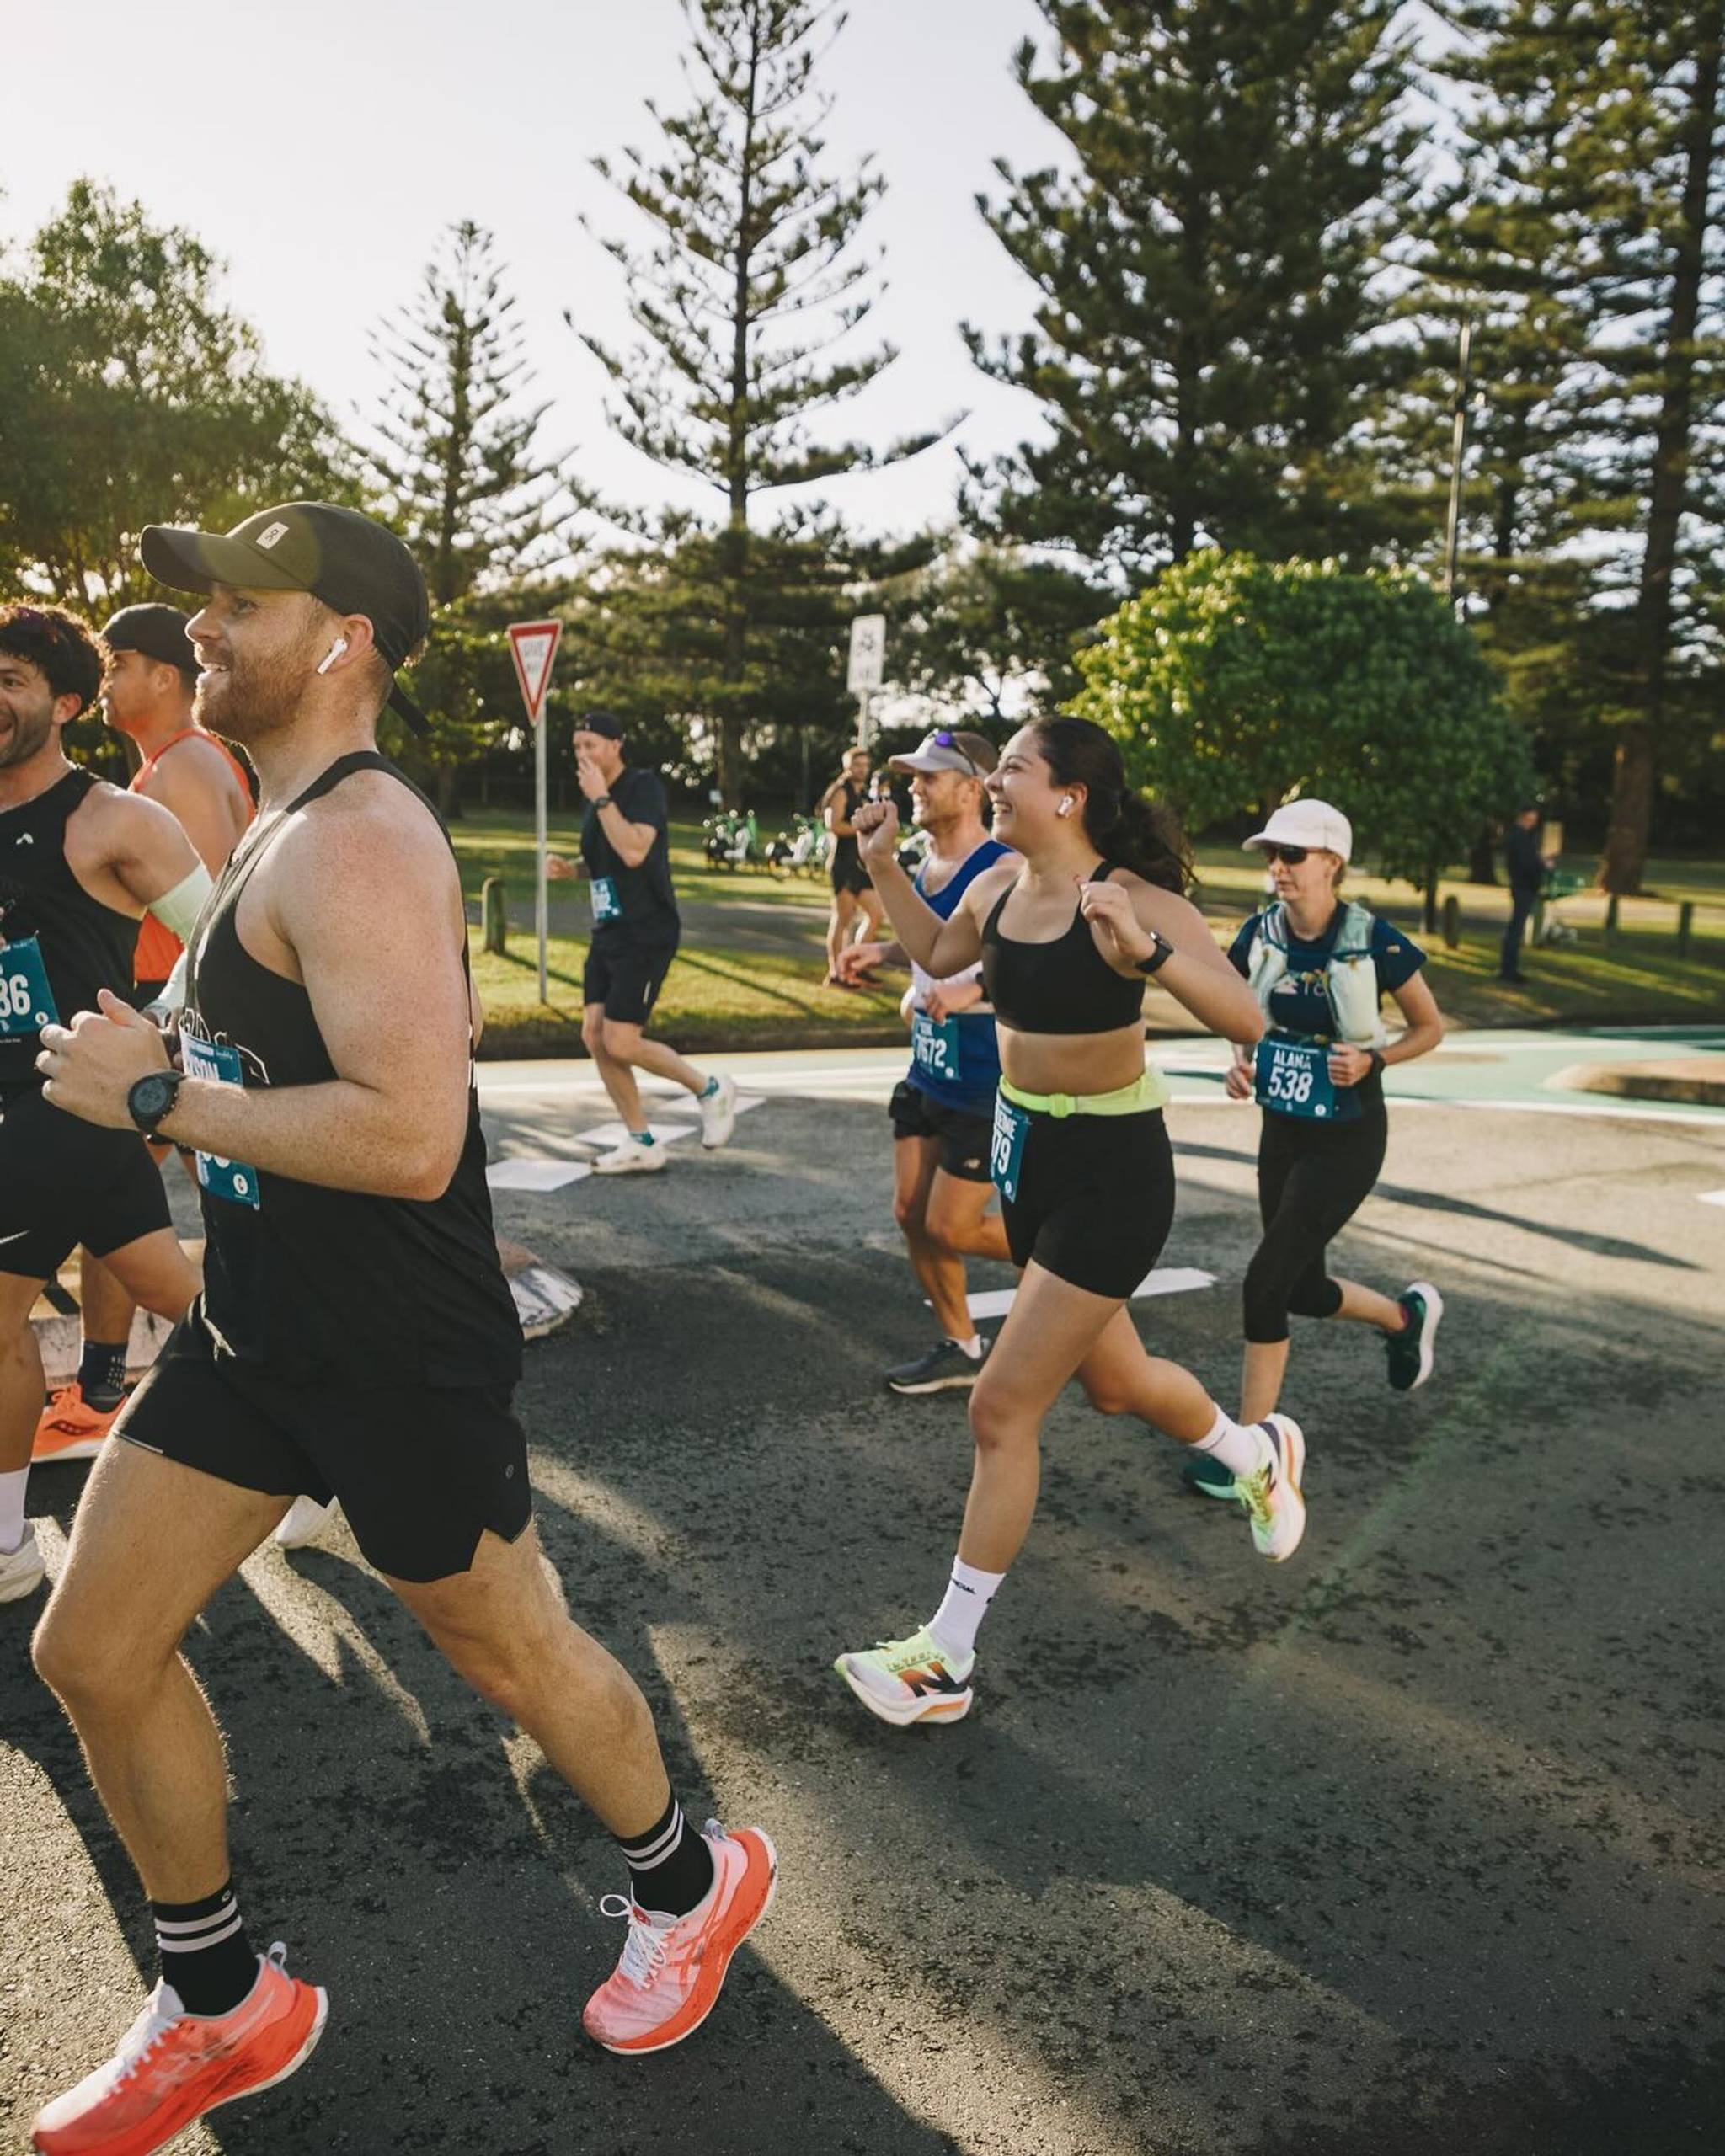 Run clubs are the new dating apps for Australians